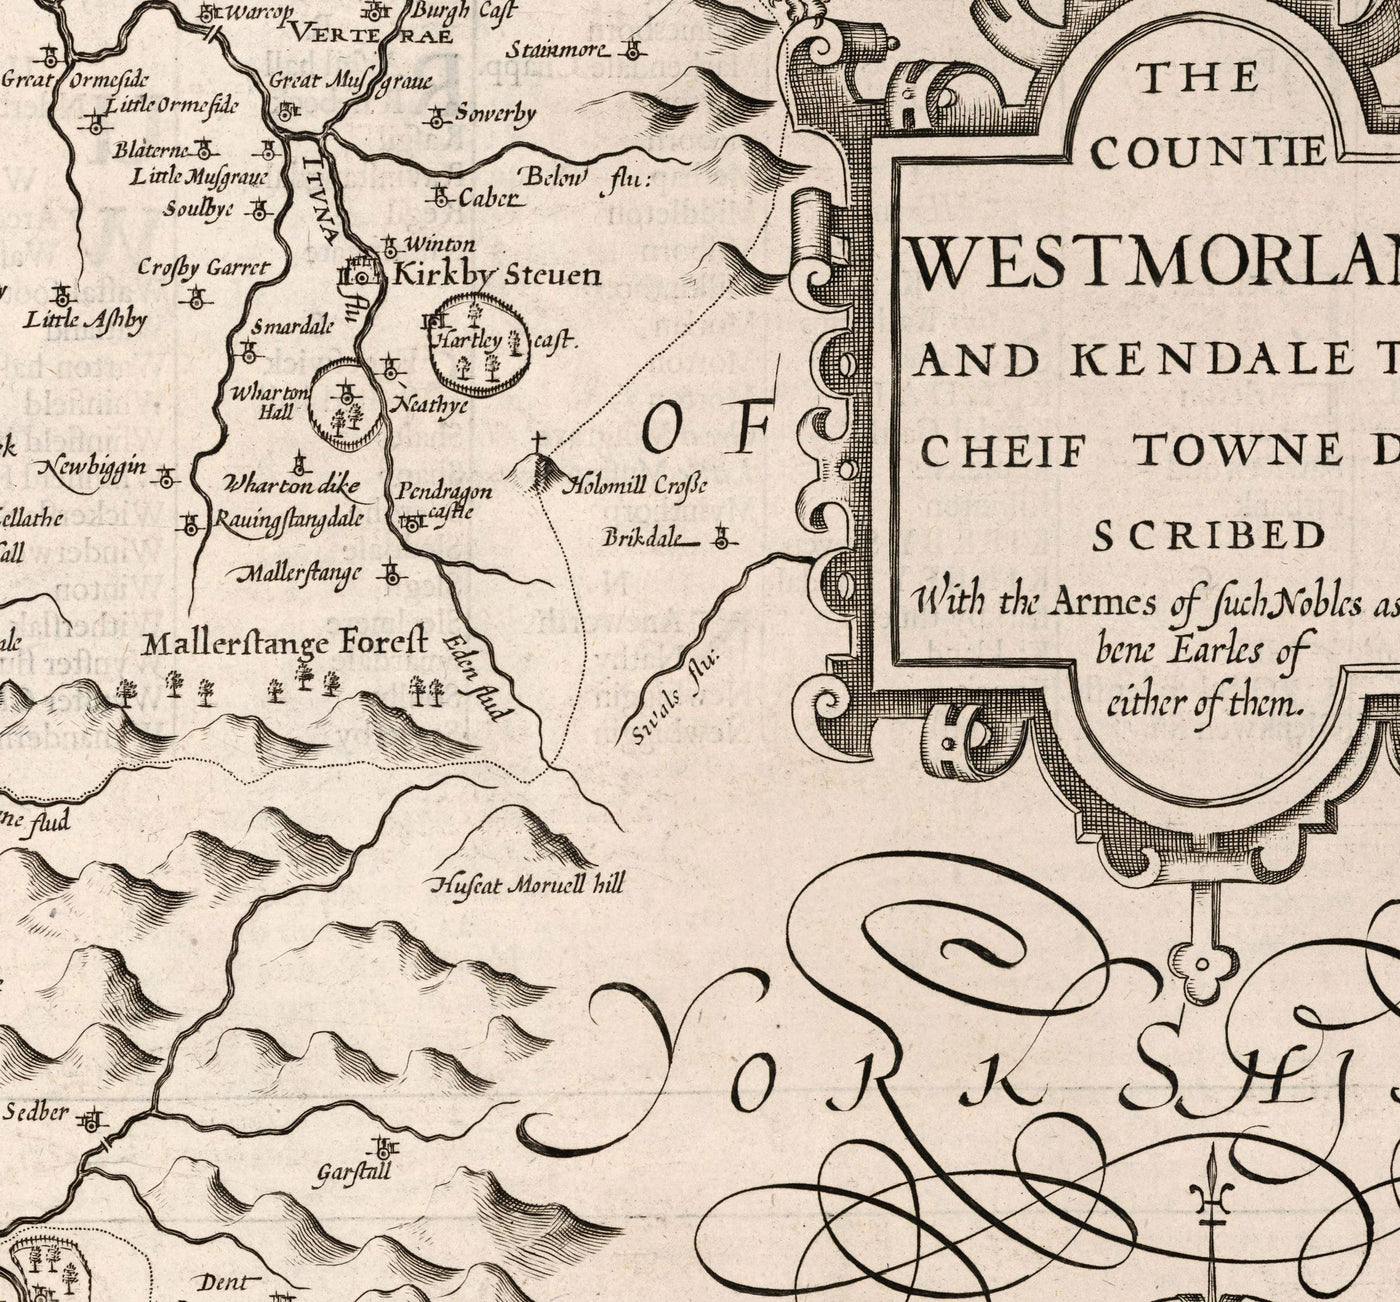 Old Monochrome Map of Westmorland, 1611 by John Speed - Lake District, Cumbria, Kendal, Windermere, Grasmere